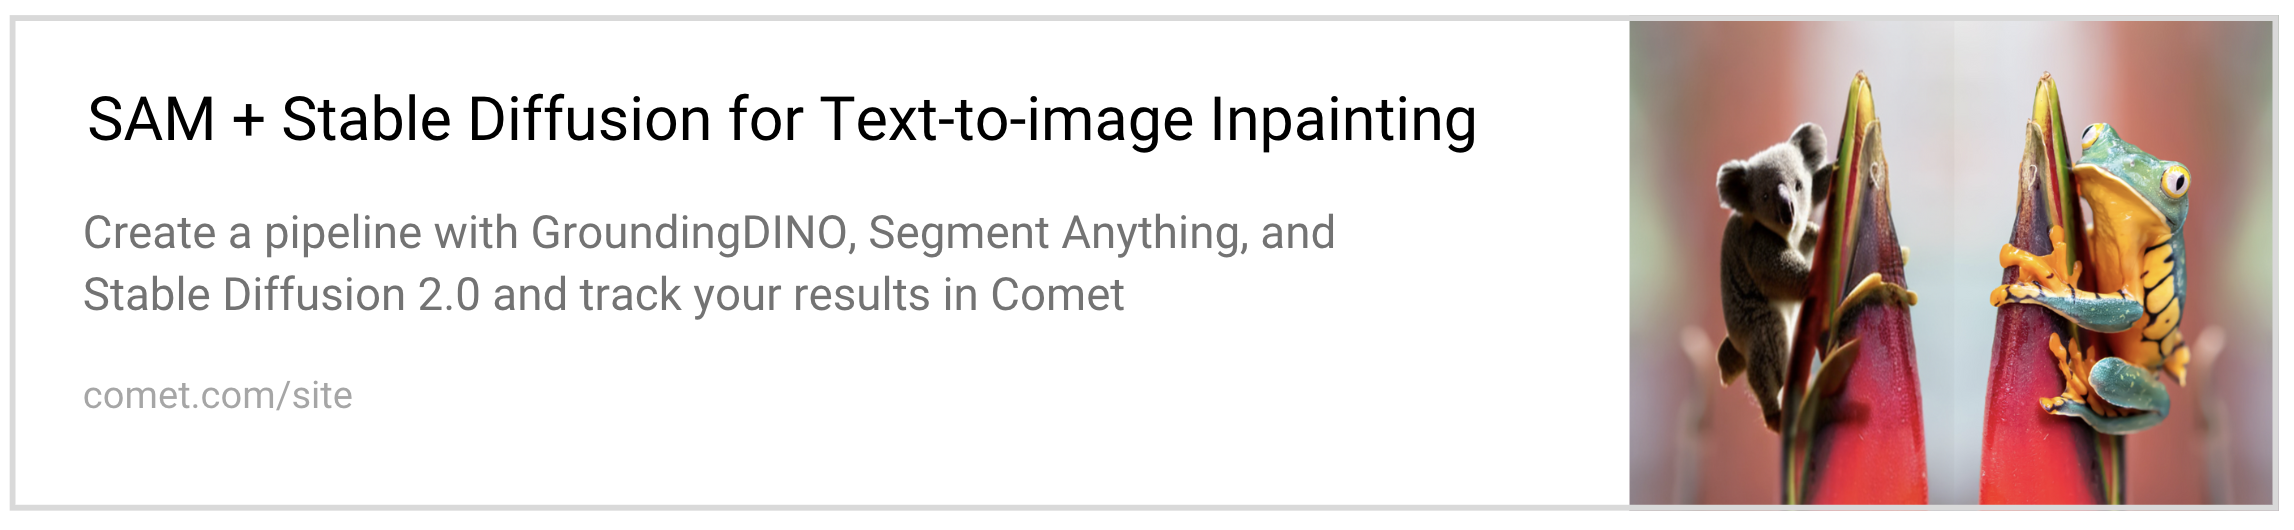 Preceding article, "SAM + Stable Diffusion for Text-to-Image-Inpainting" from Comet ML